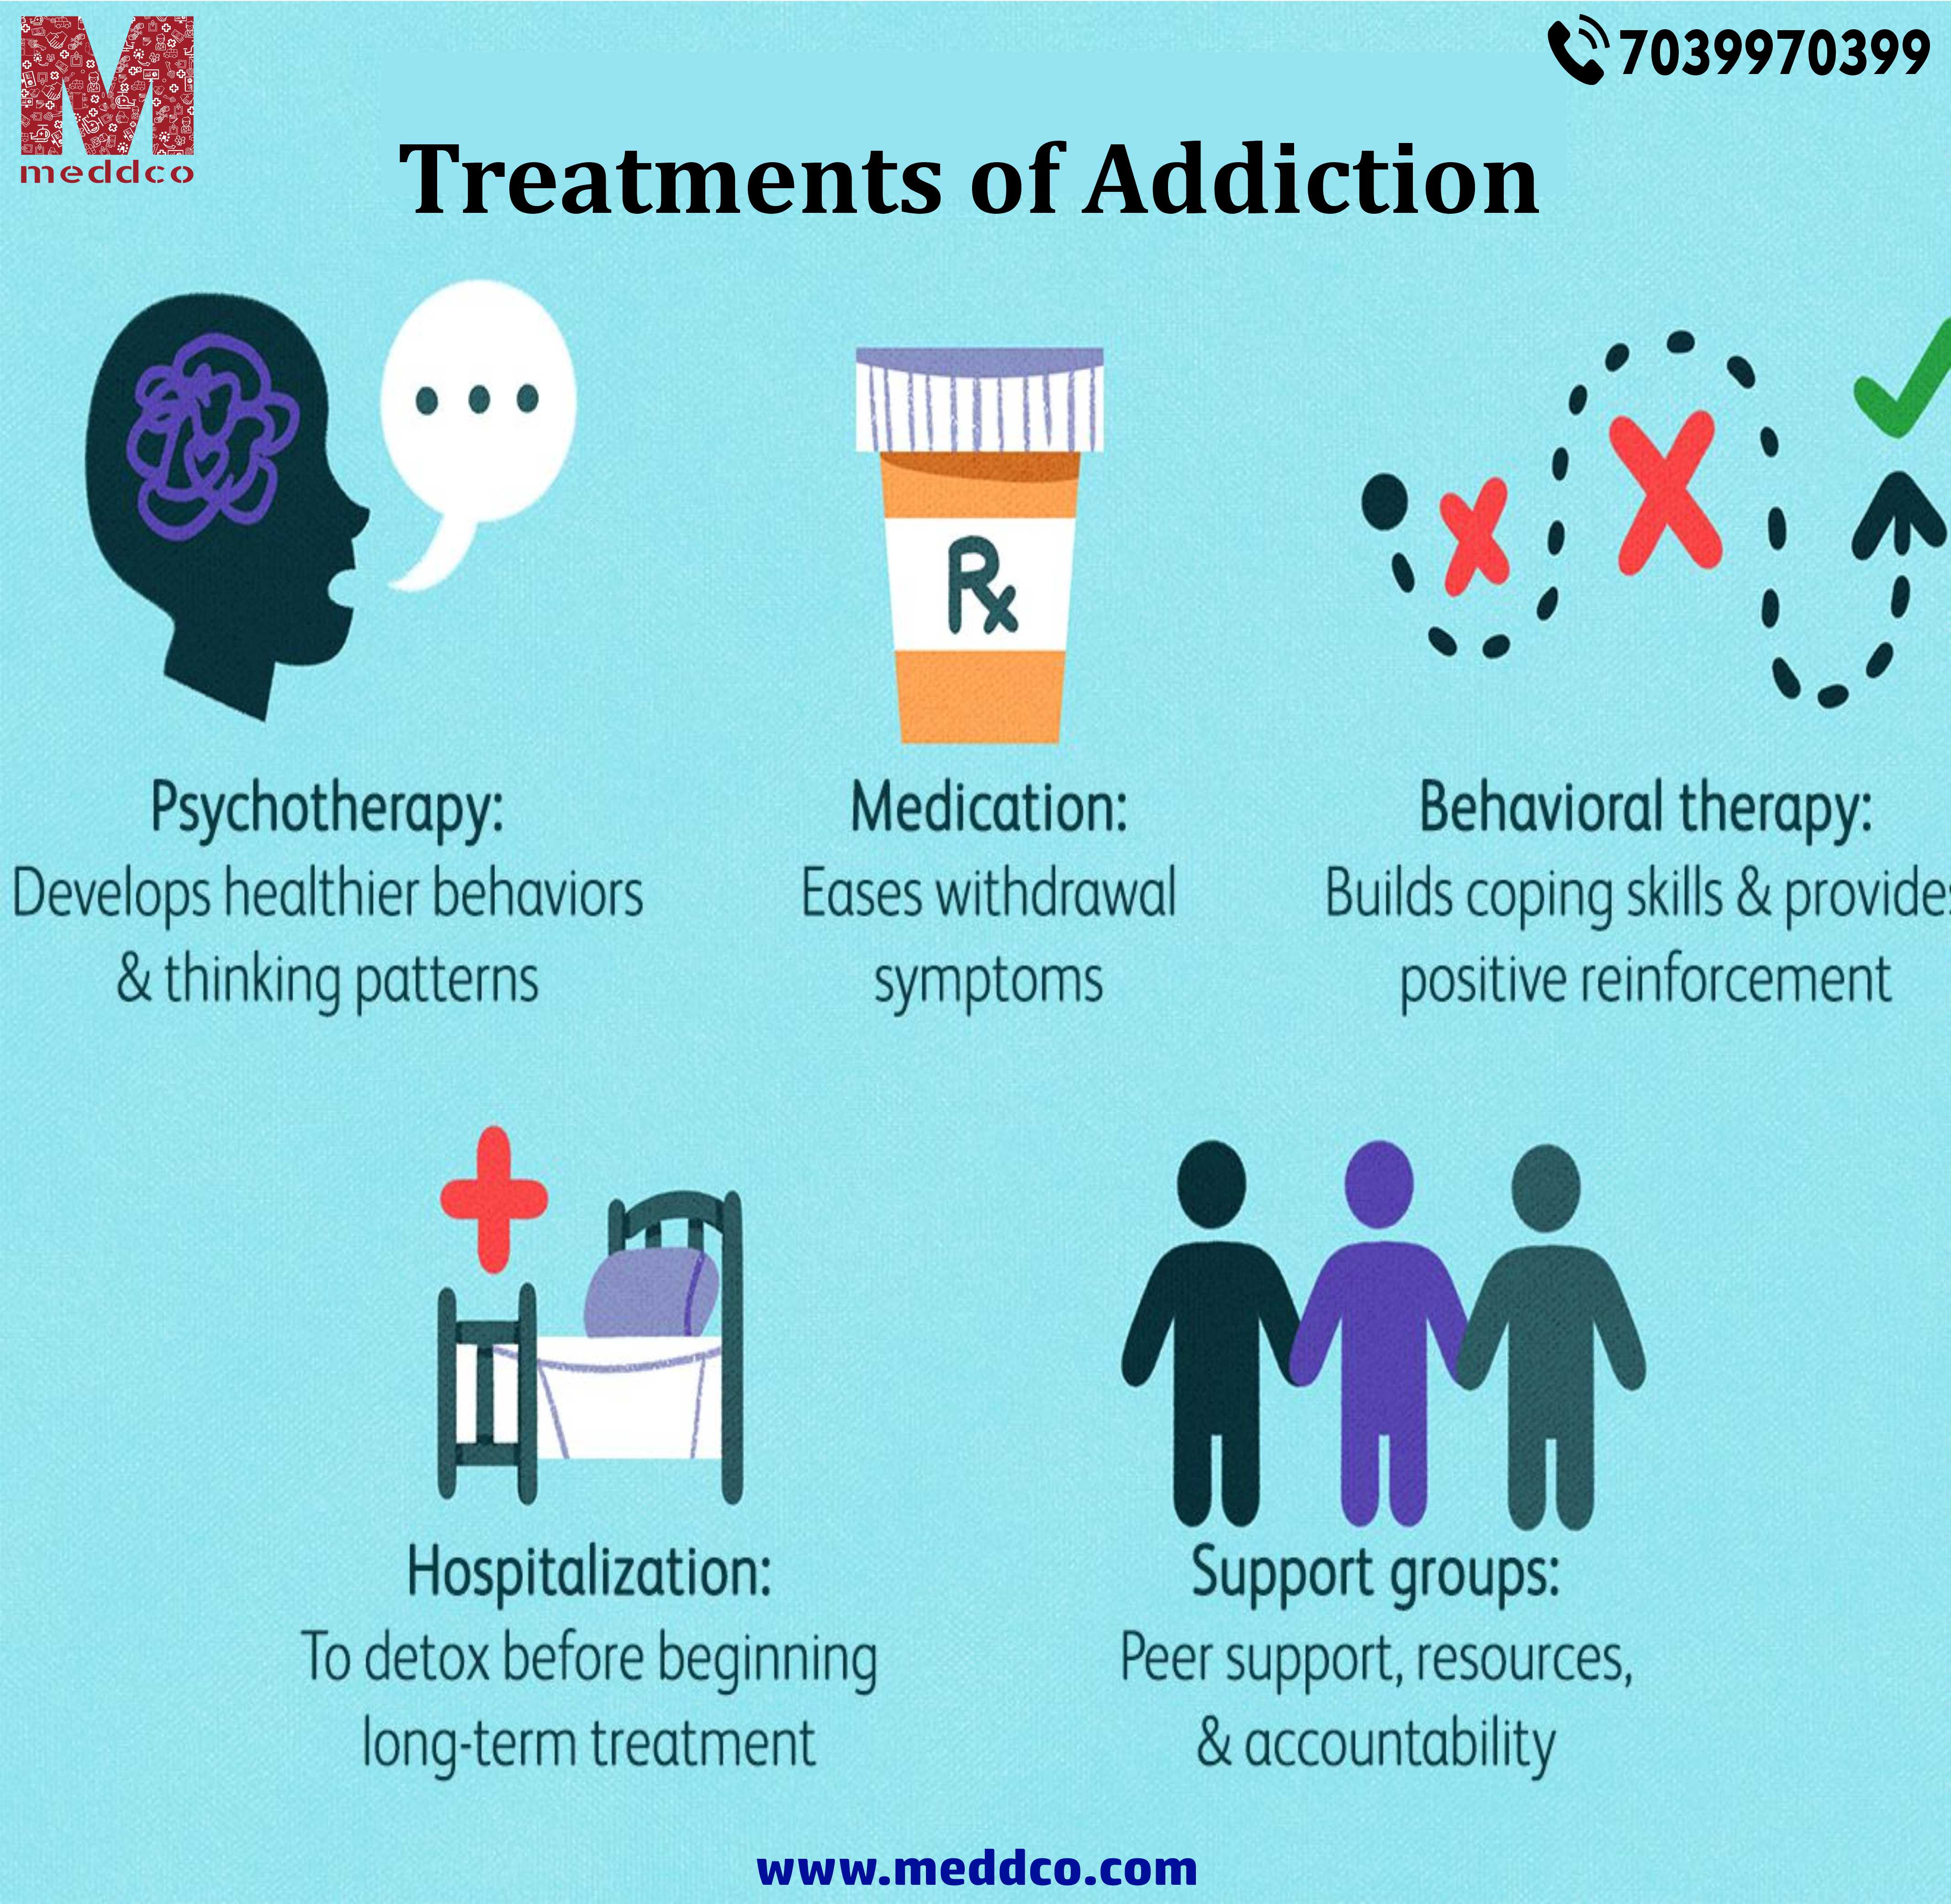 Effects of addiction on decision-making abilities